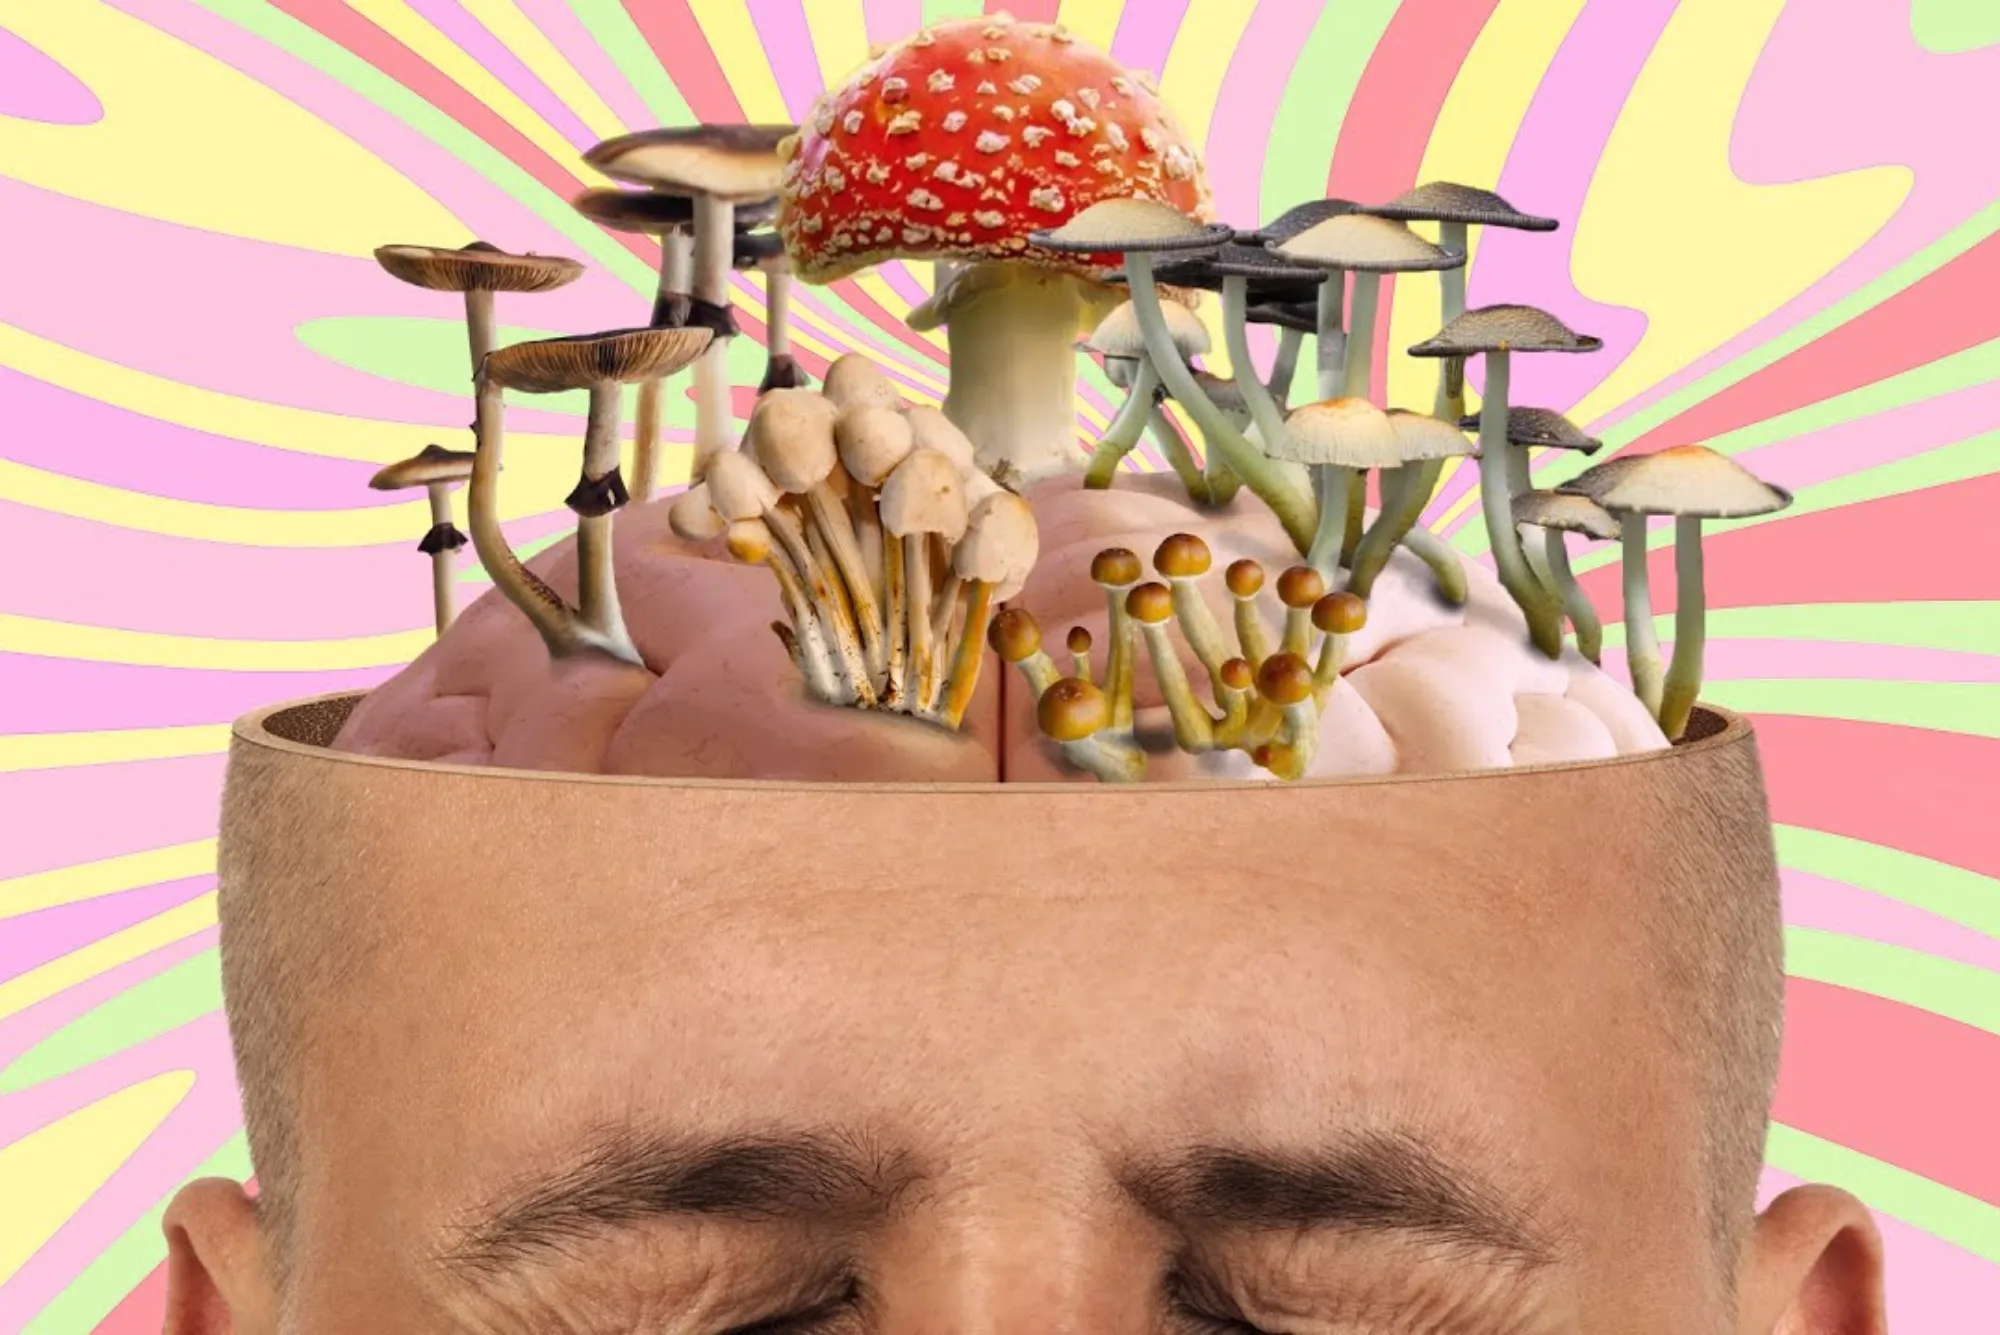 Best Thing To Do On Shrooms